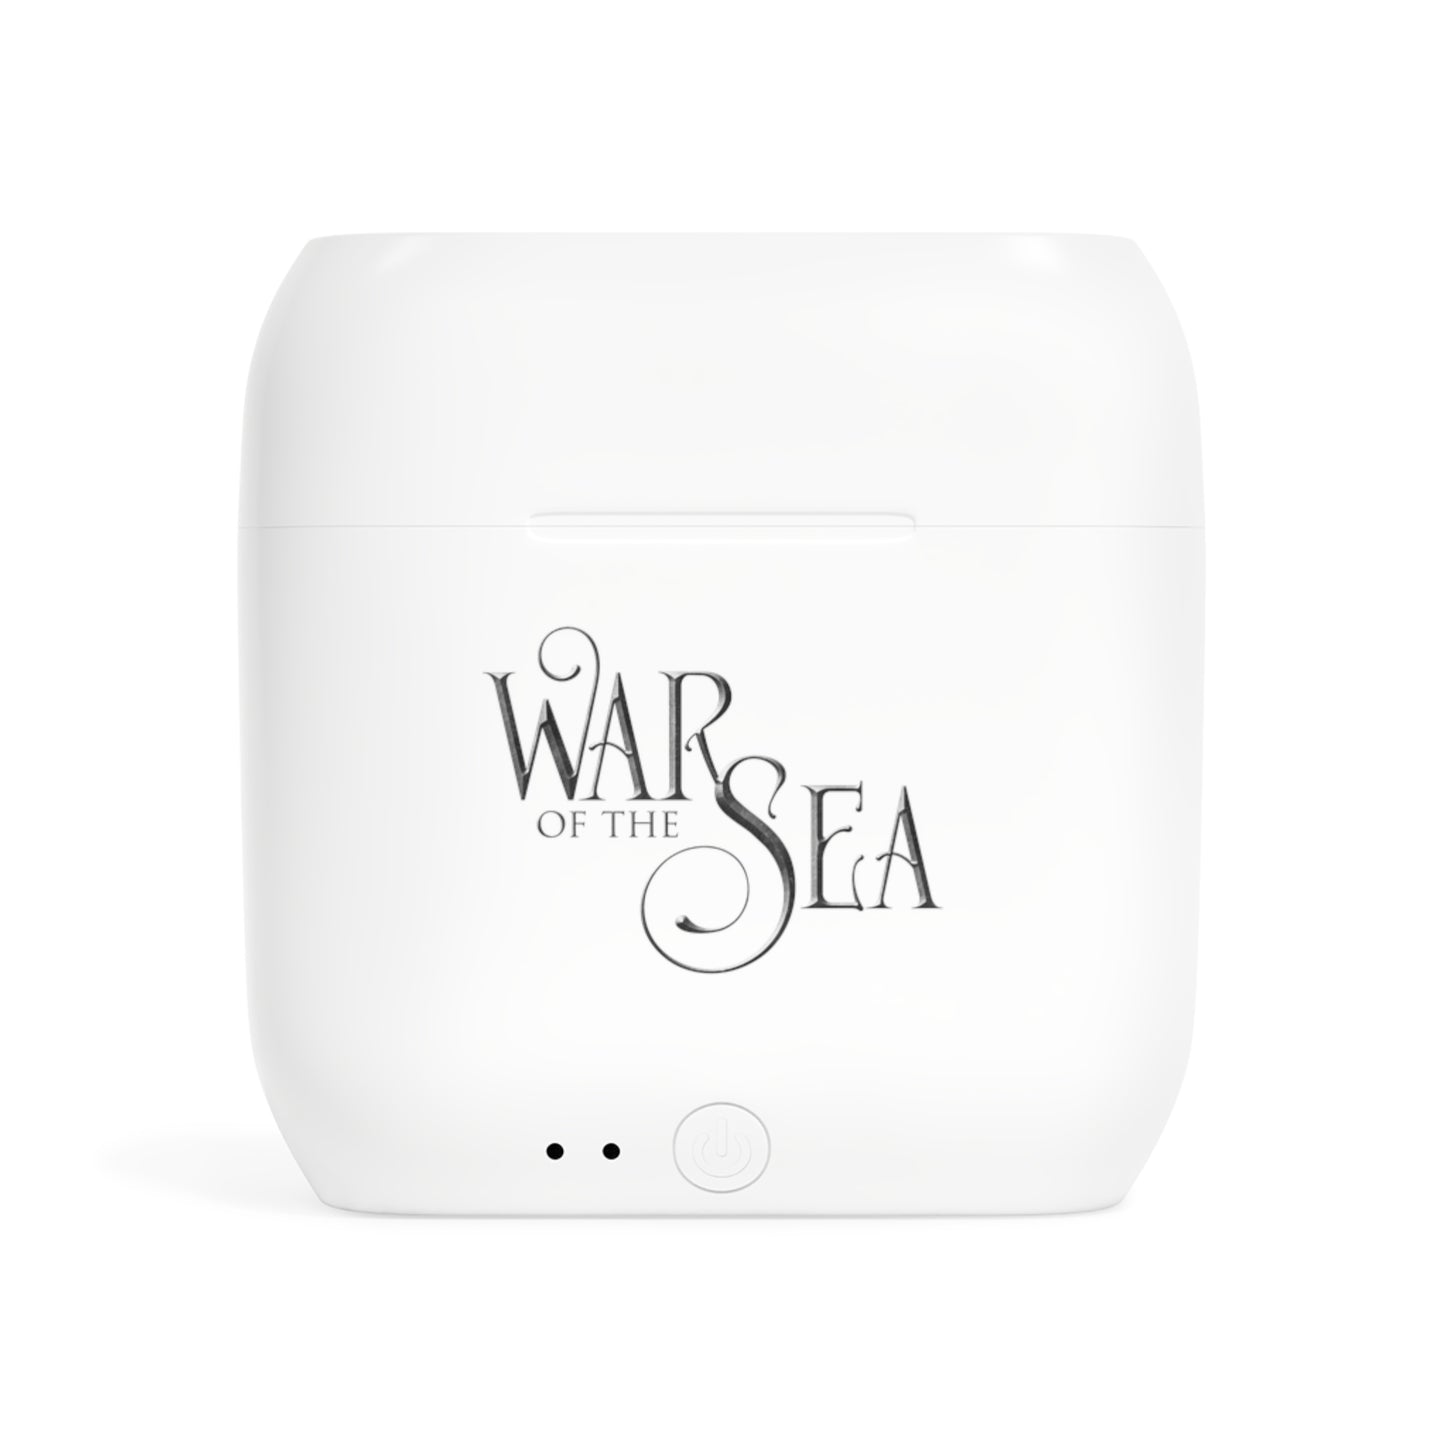 "War of the Sea" Essos Wireless Earbuds